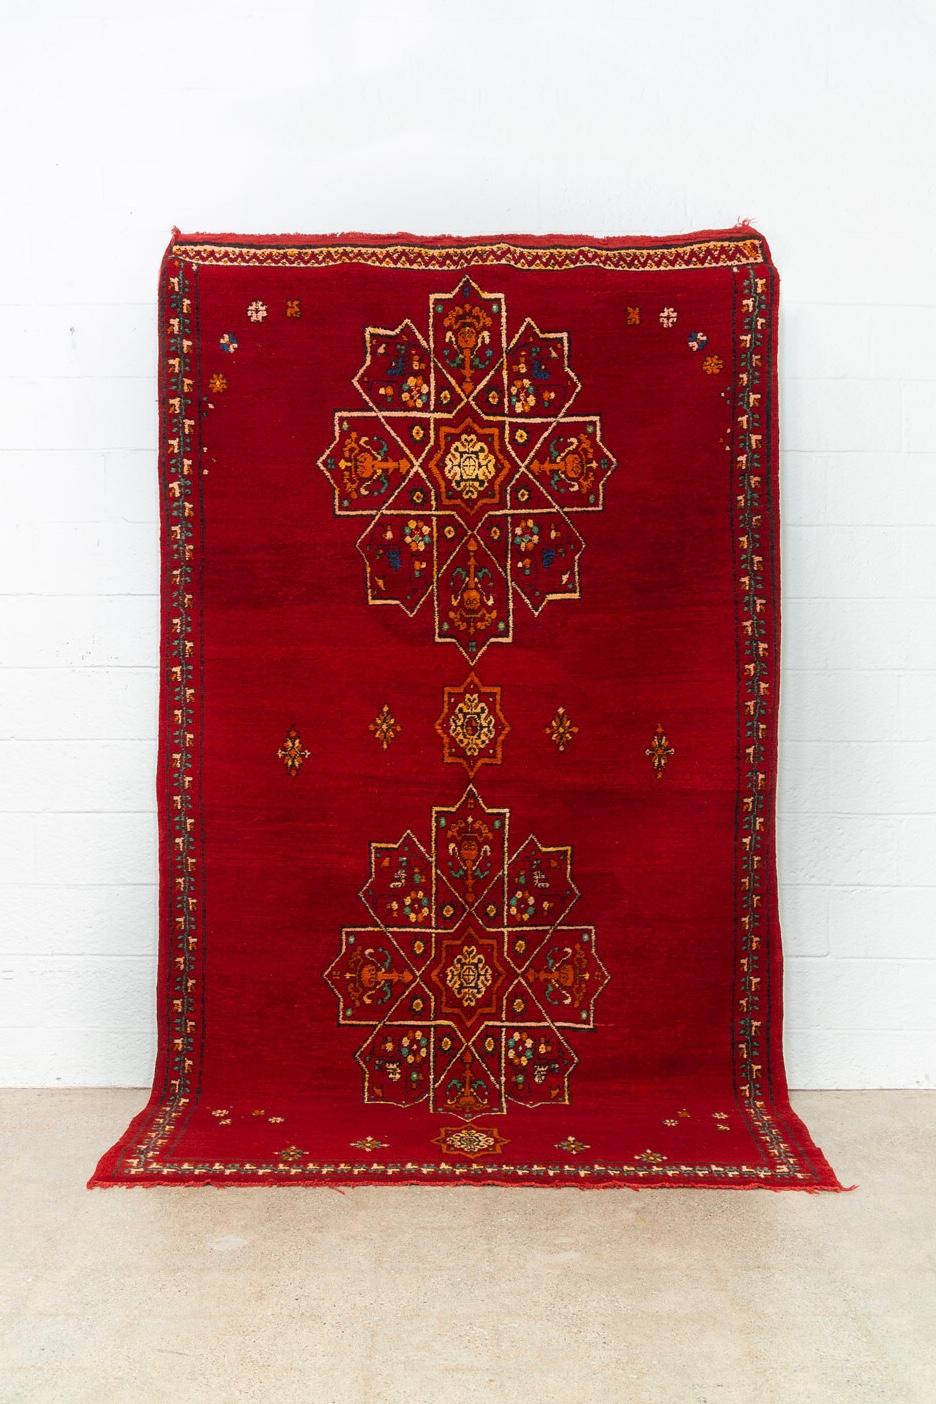 This stunning large vintage handwoven Moroccan Berber rug circa mid-20th century is a beautiful combination of hand knotted pile and embroidery. The design features a large symmetrical arabesque pattern on a gorgeous field of crimson red with accent